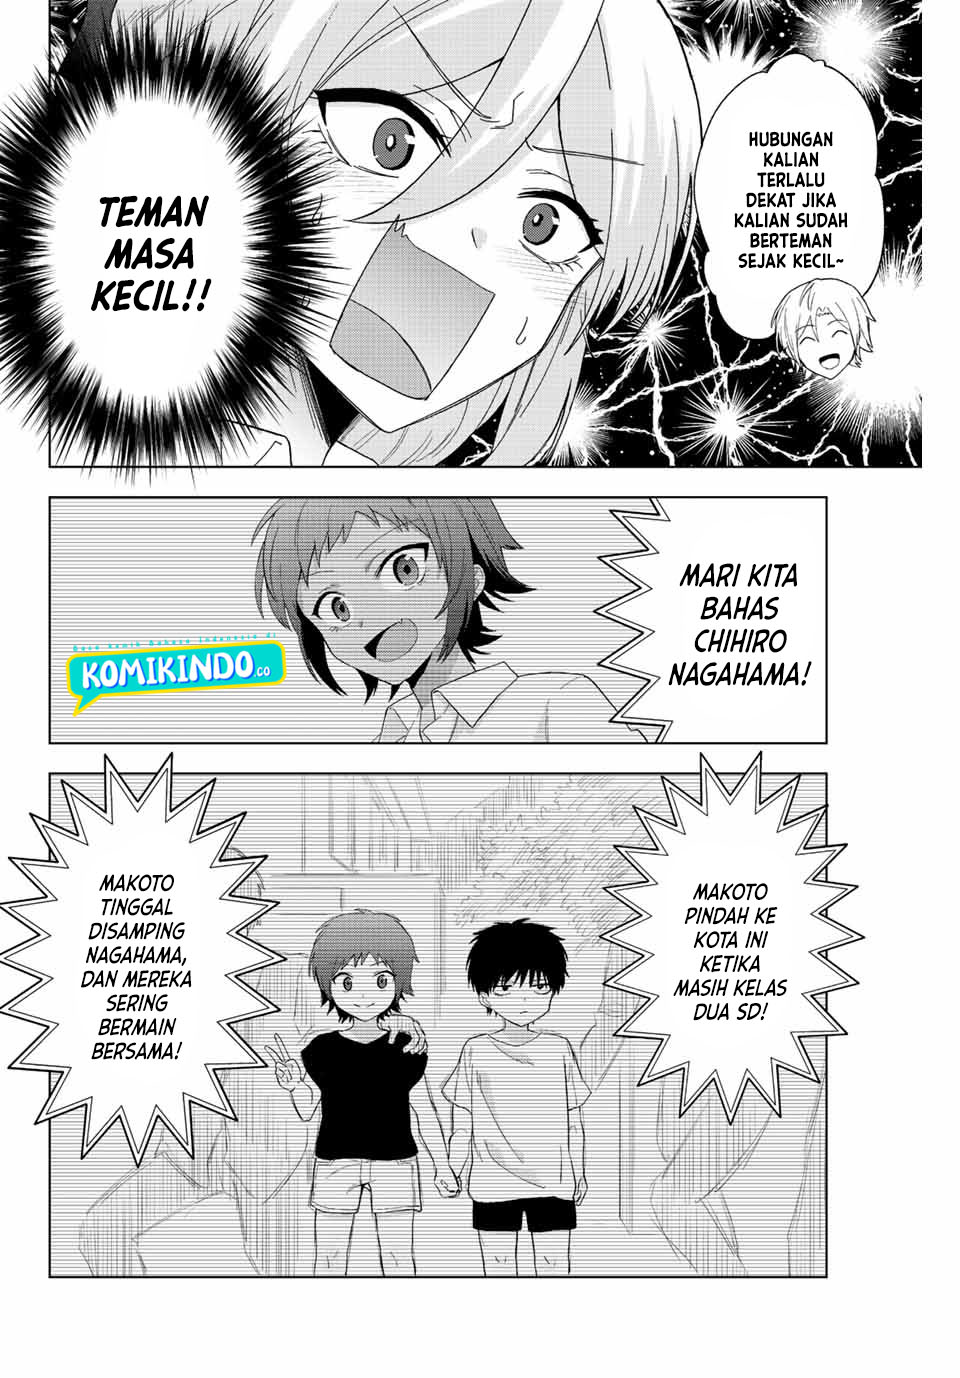 The Death Game Is All That Saotome-san Has Left Chapter 04